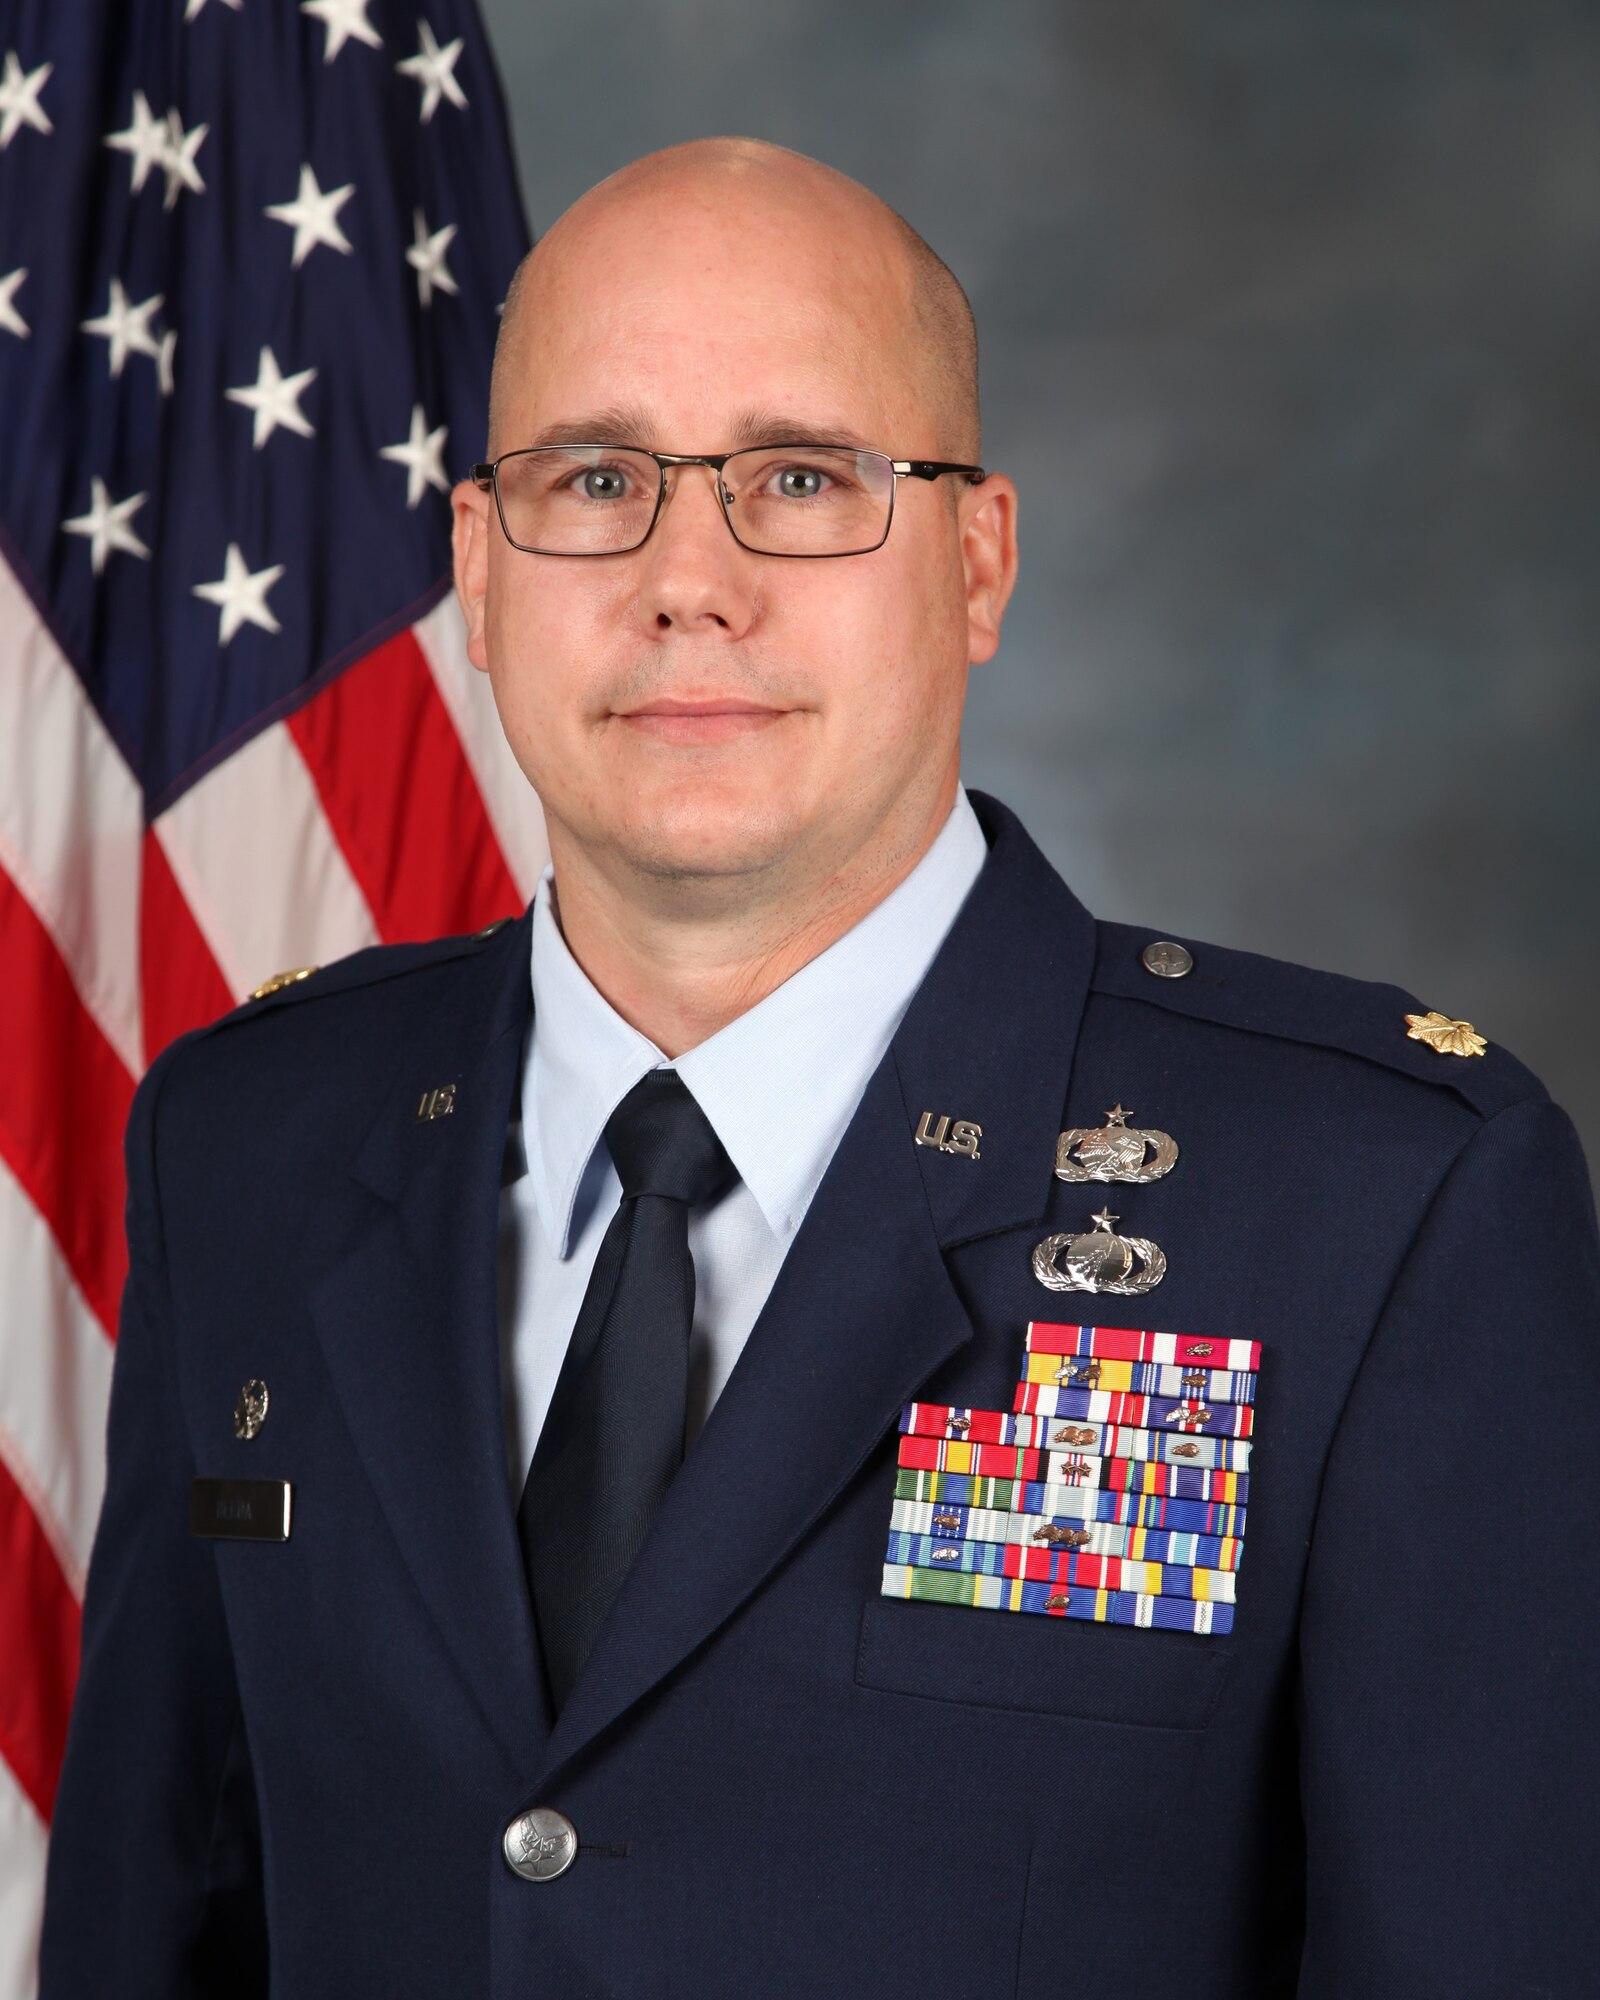 Portrait photo of an Air Force officer.